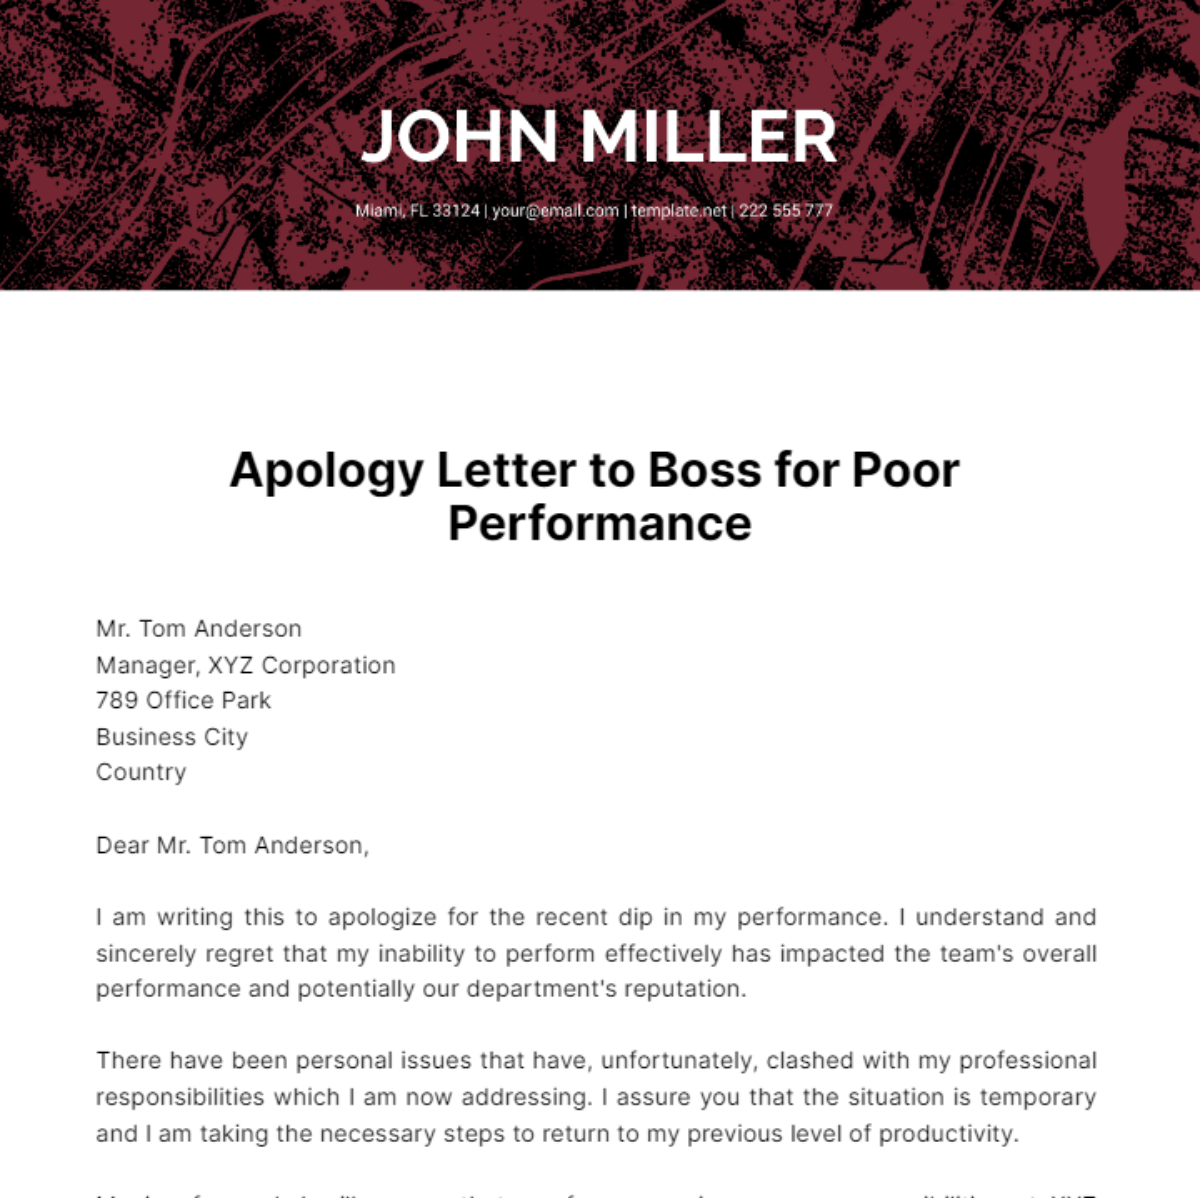 Apology Letter to Boss for Poor Performance Template